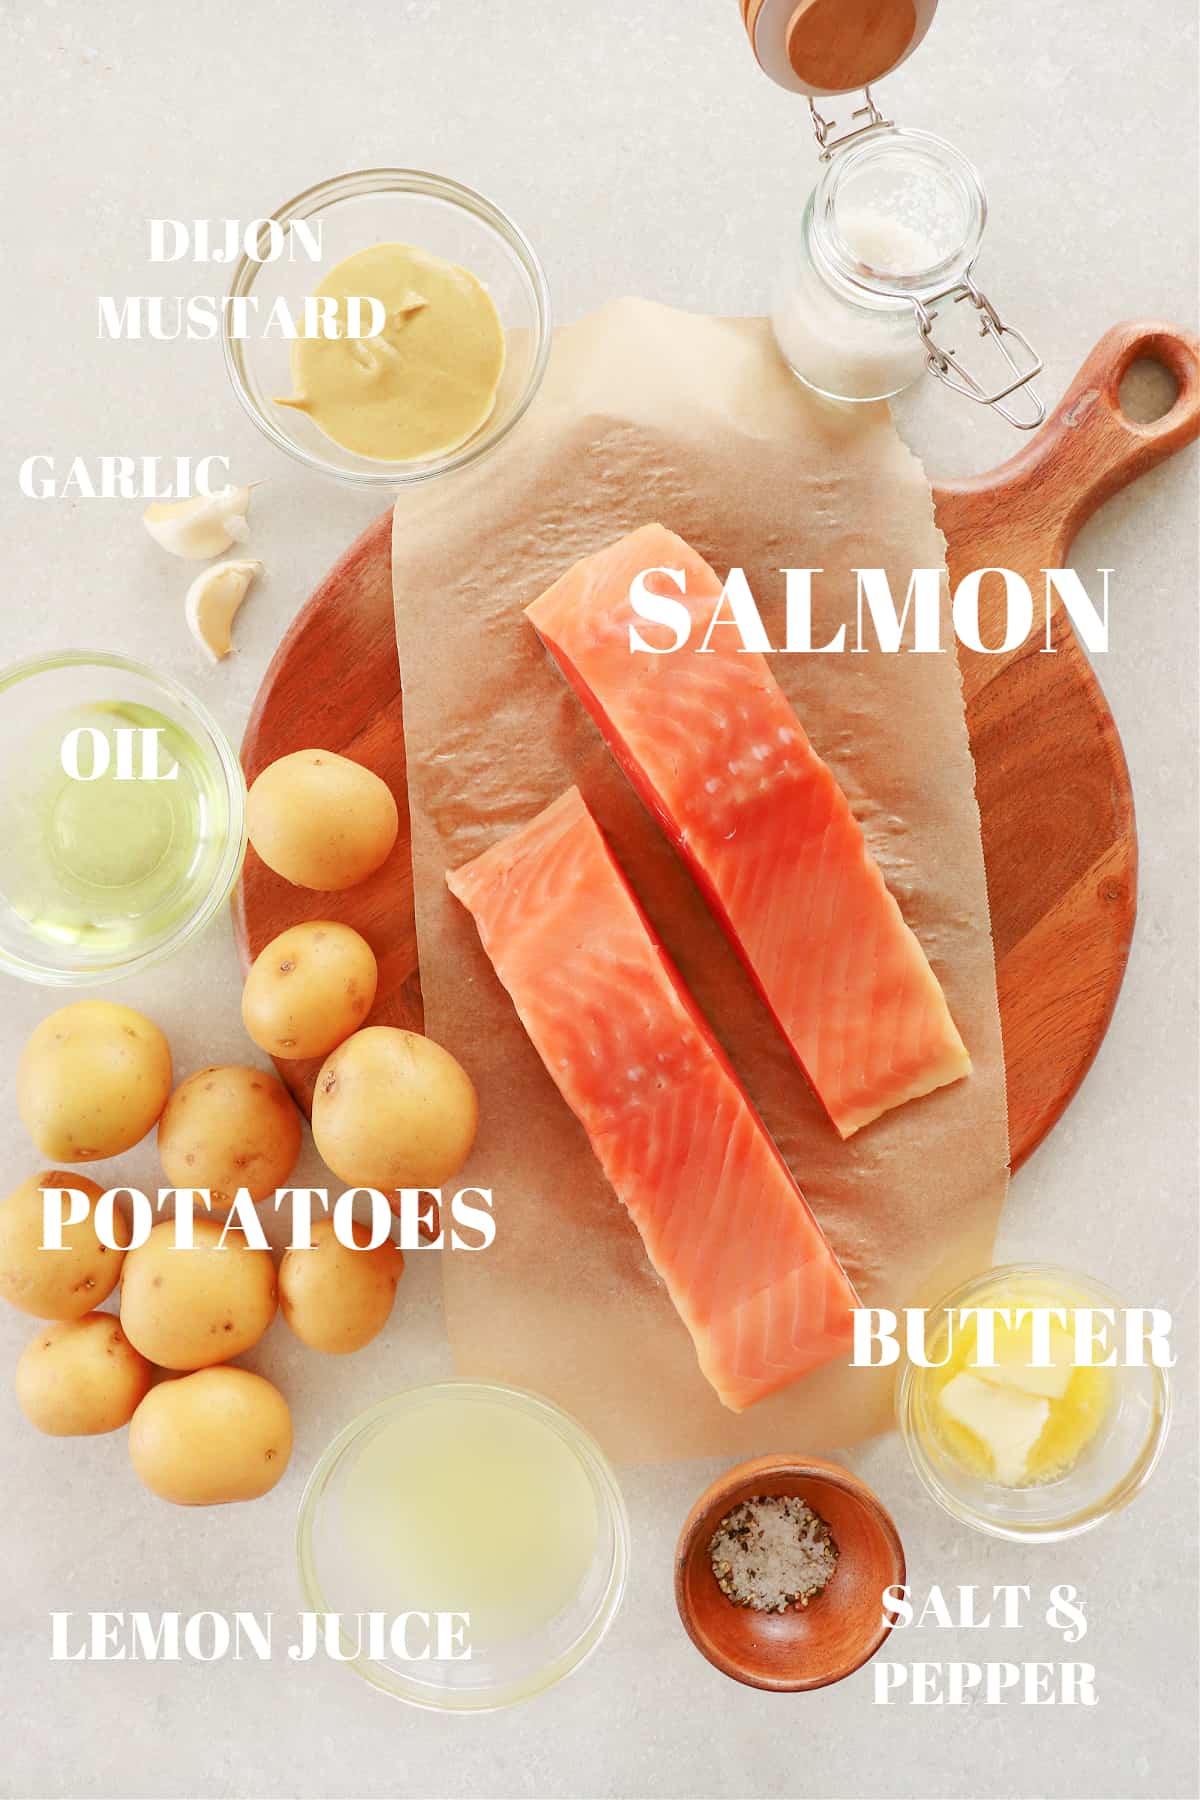 Ingredients for salmon and potatoes on a round wooden board.